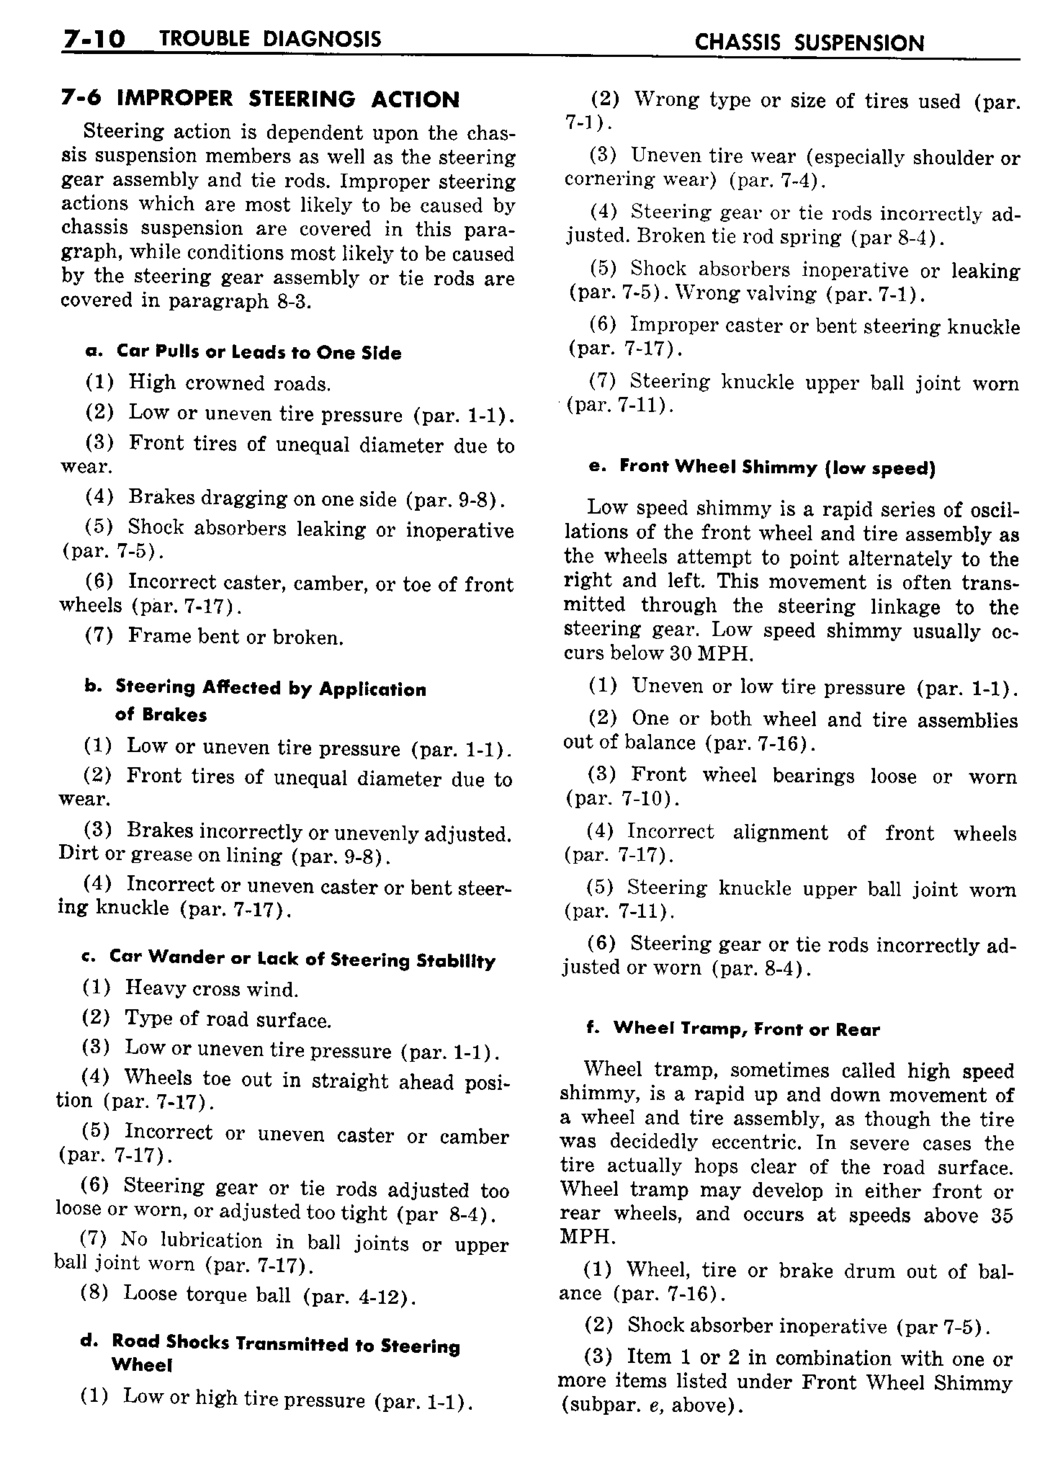 n_08 1960 Buick Shop Manual - Chassis Suspension-010-010.jpg